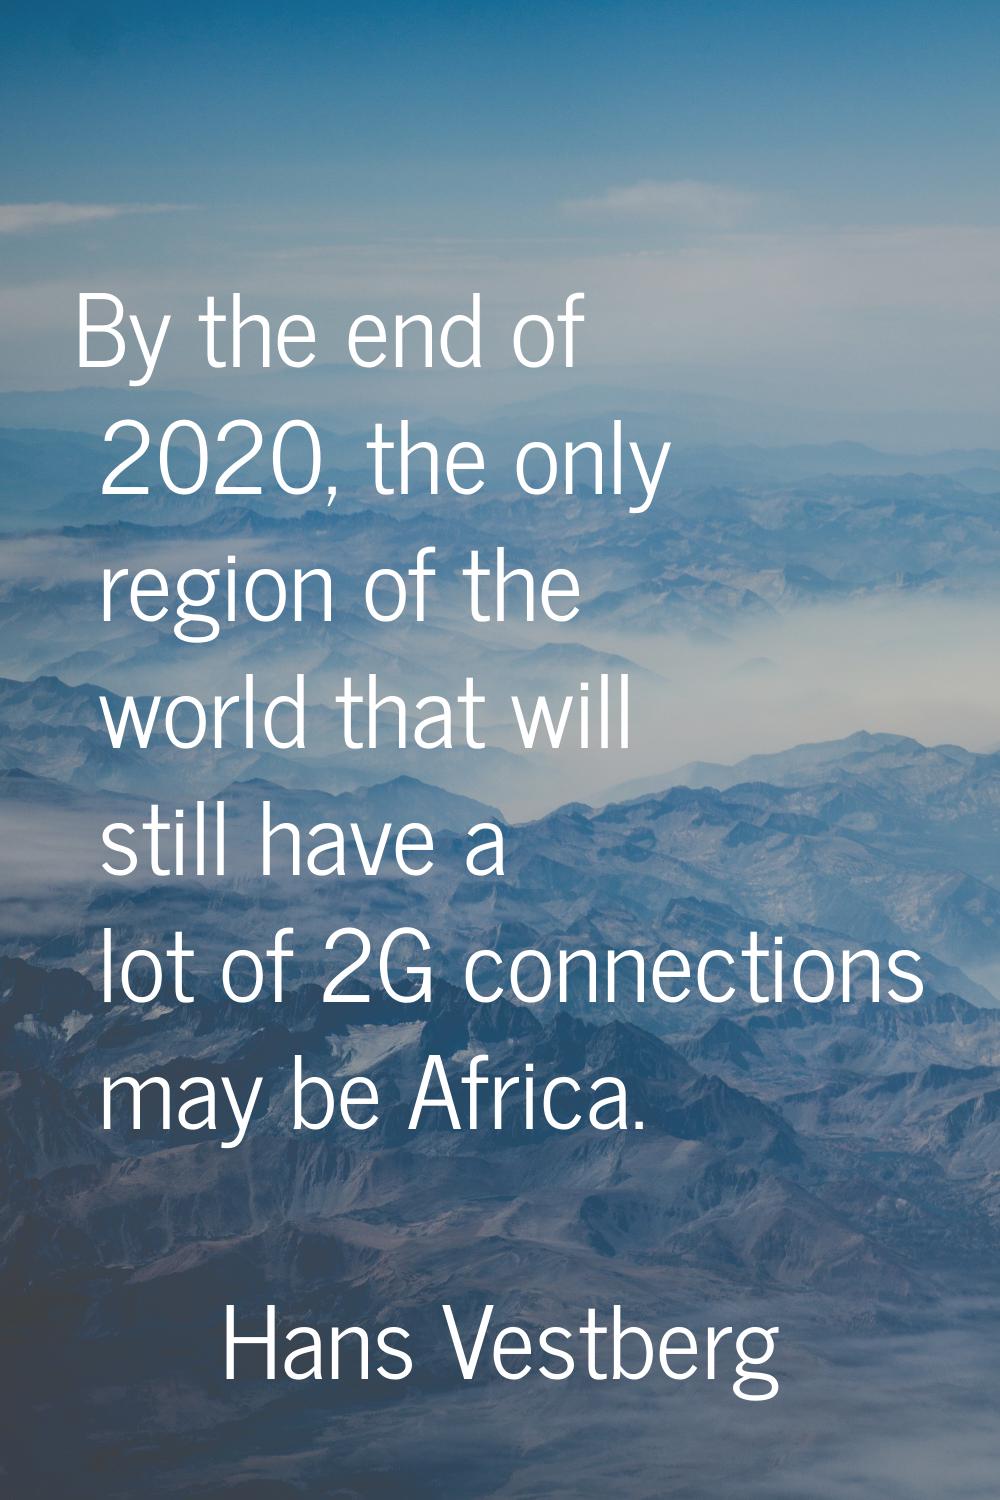 By the end of 2020, the only region of the world that will still have a lot of 2G connections may b